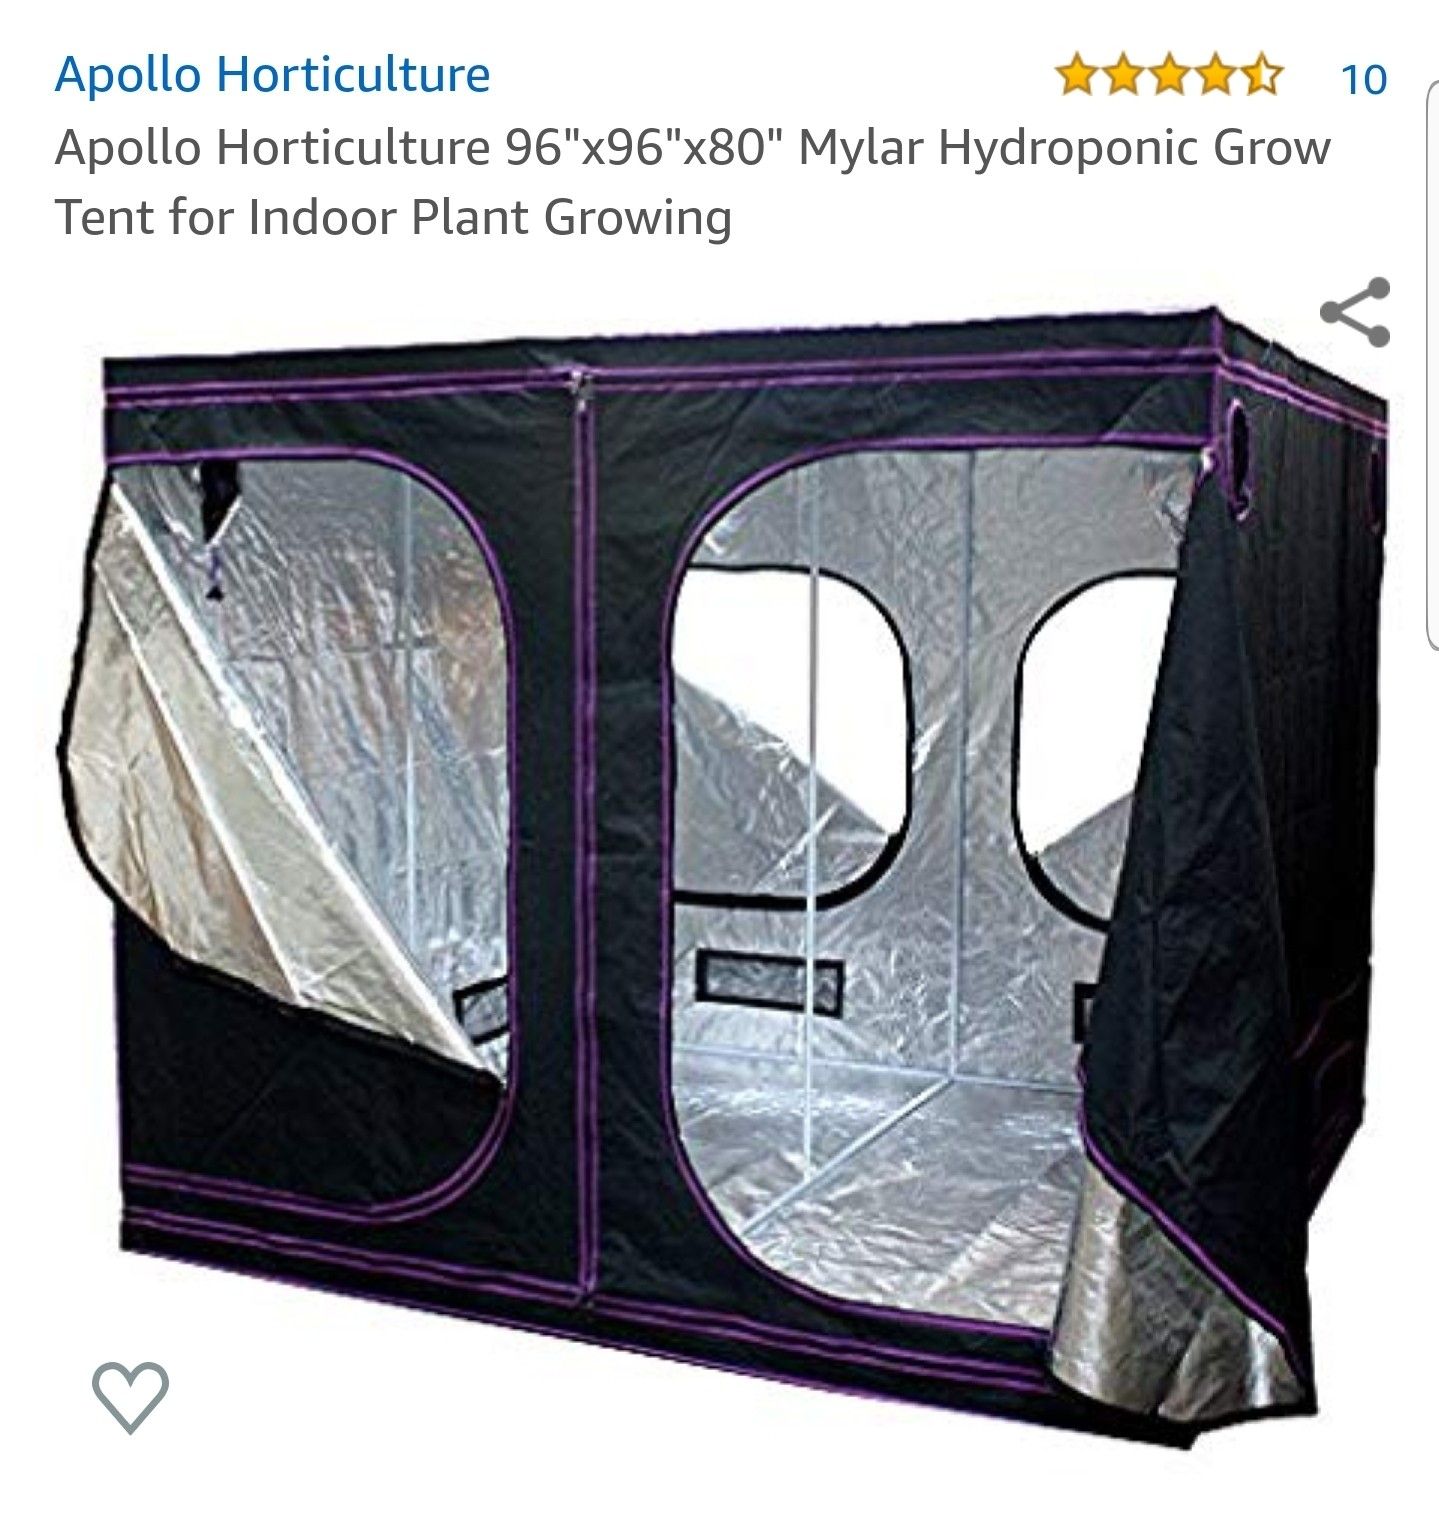 Apollo Horticulture 96"x96"x80" Mylar Hydroponic Grow Tent for Indoor Plant Growing